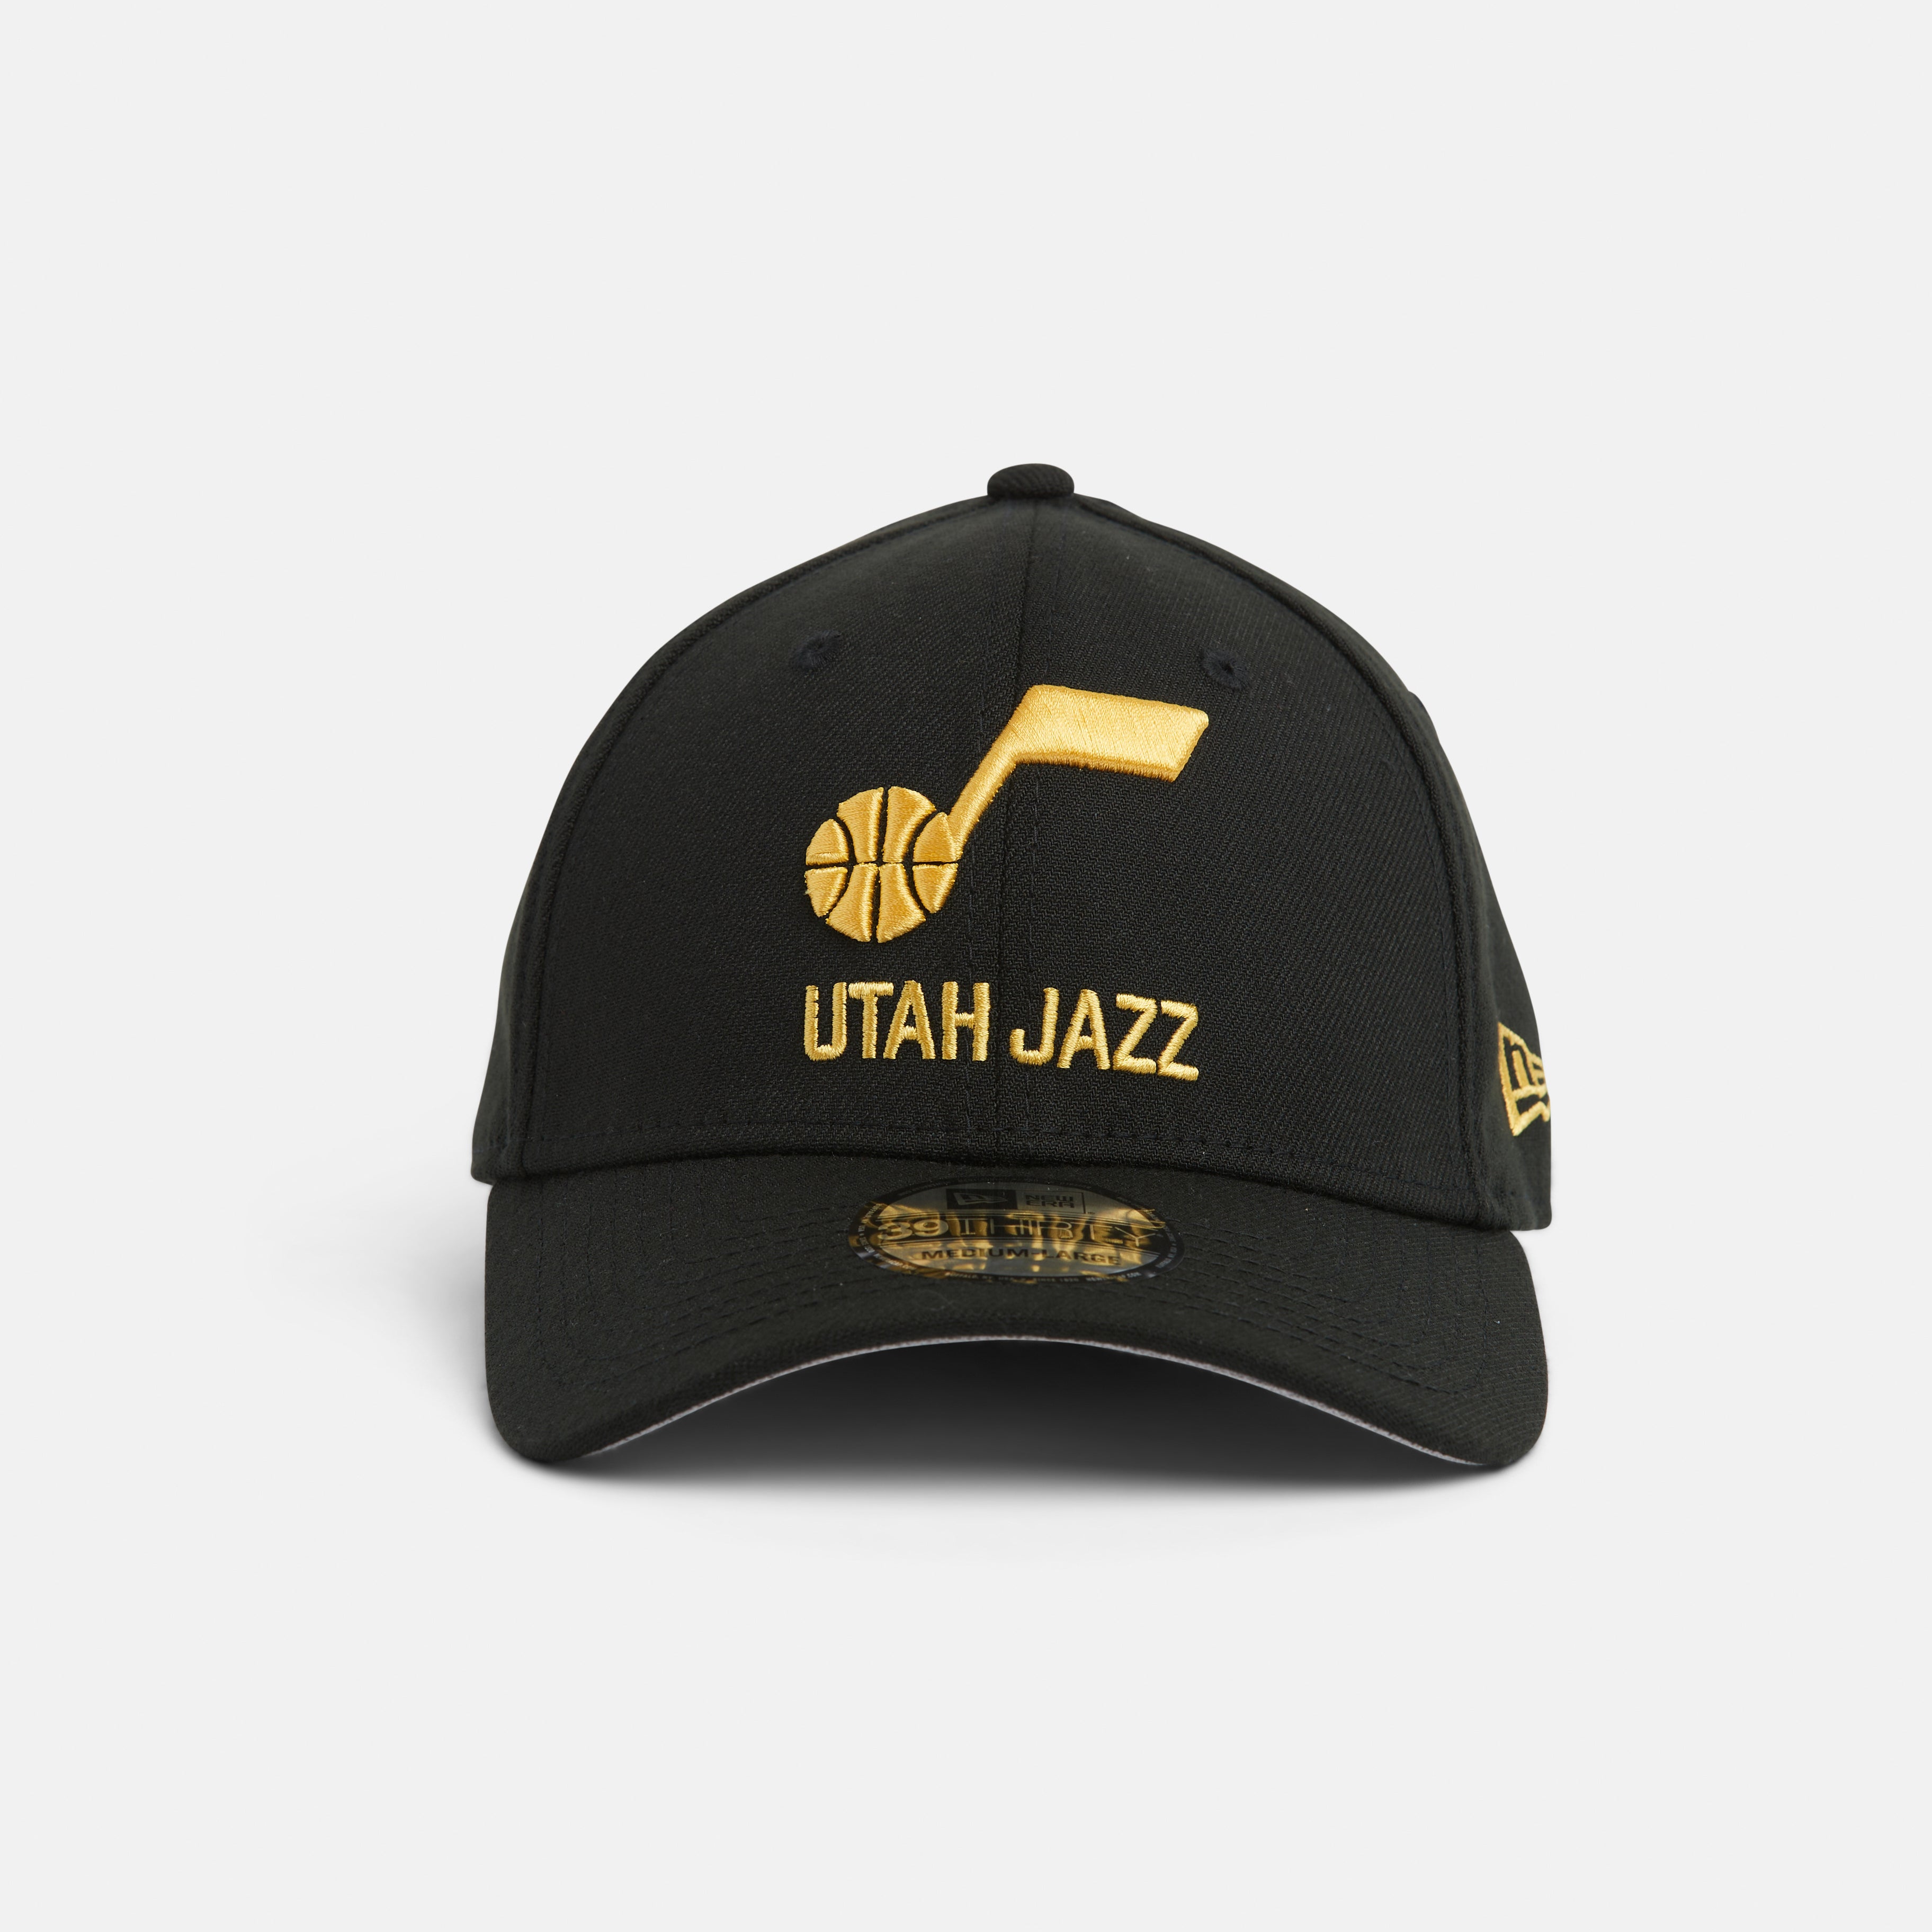 Front black 3930 with yellow note and Utah Jazz wordmark logo.